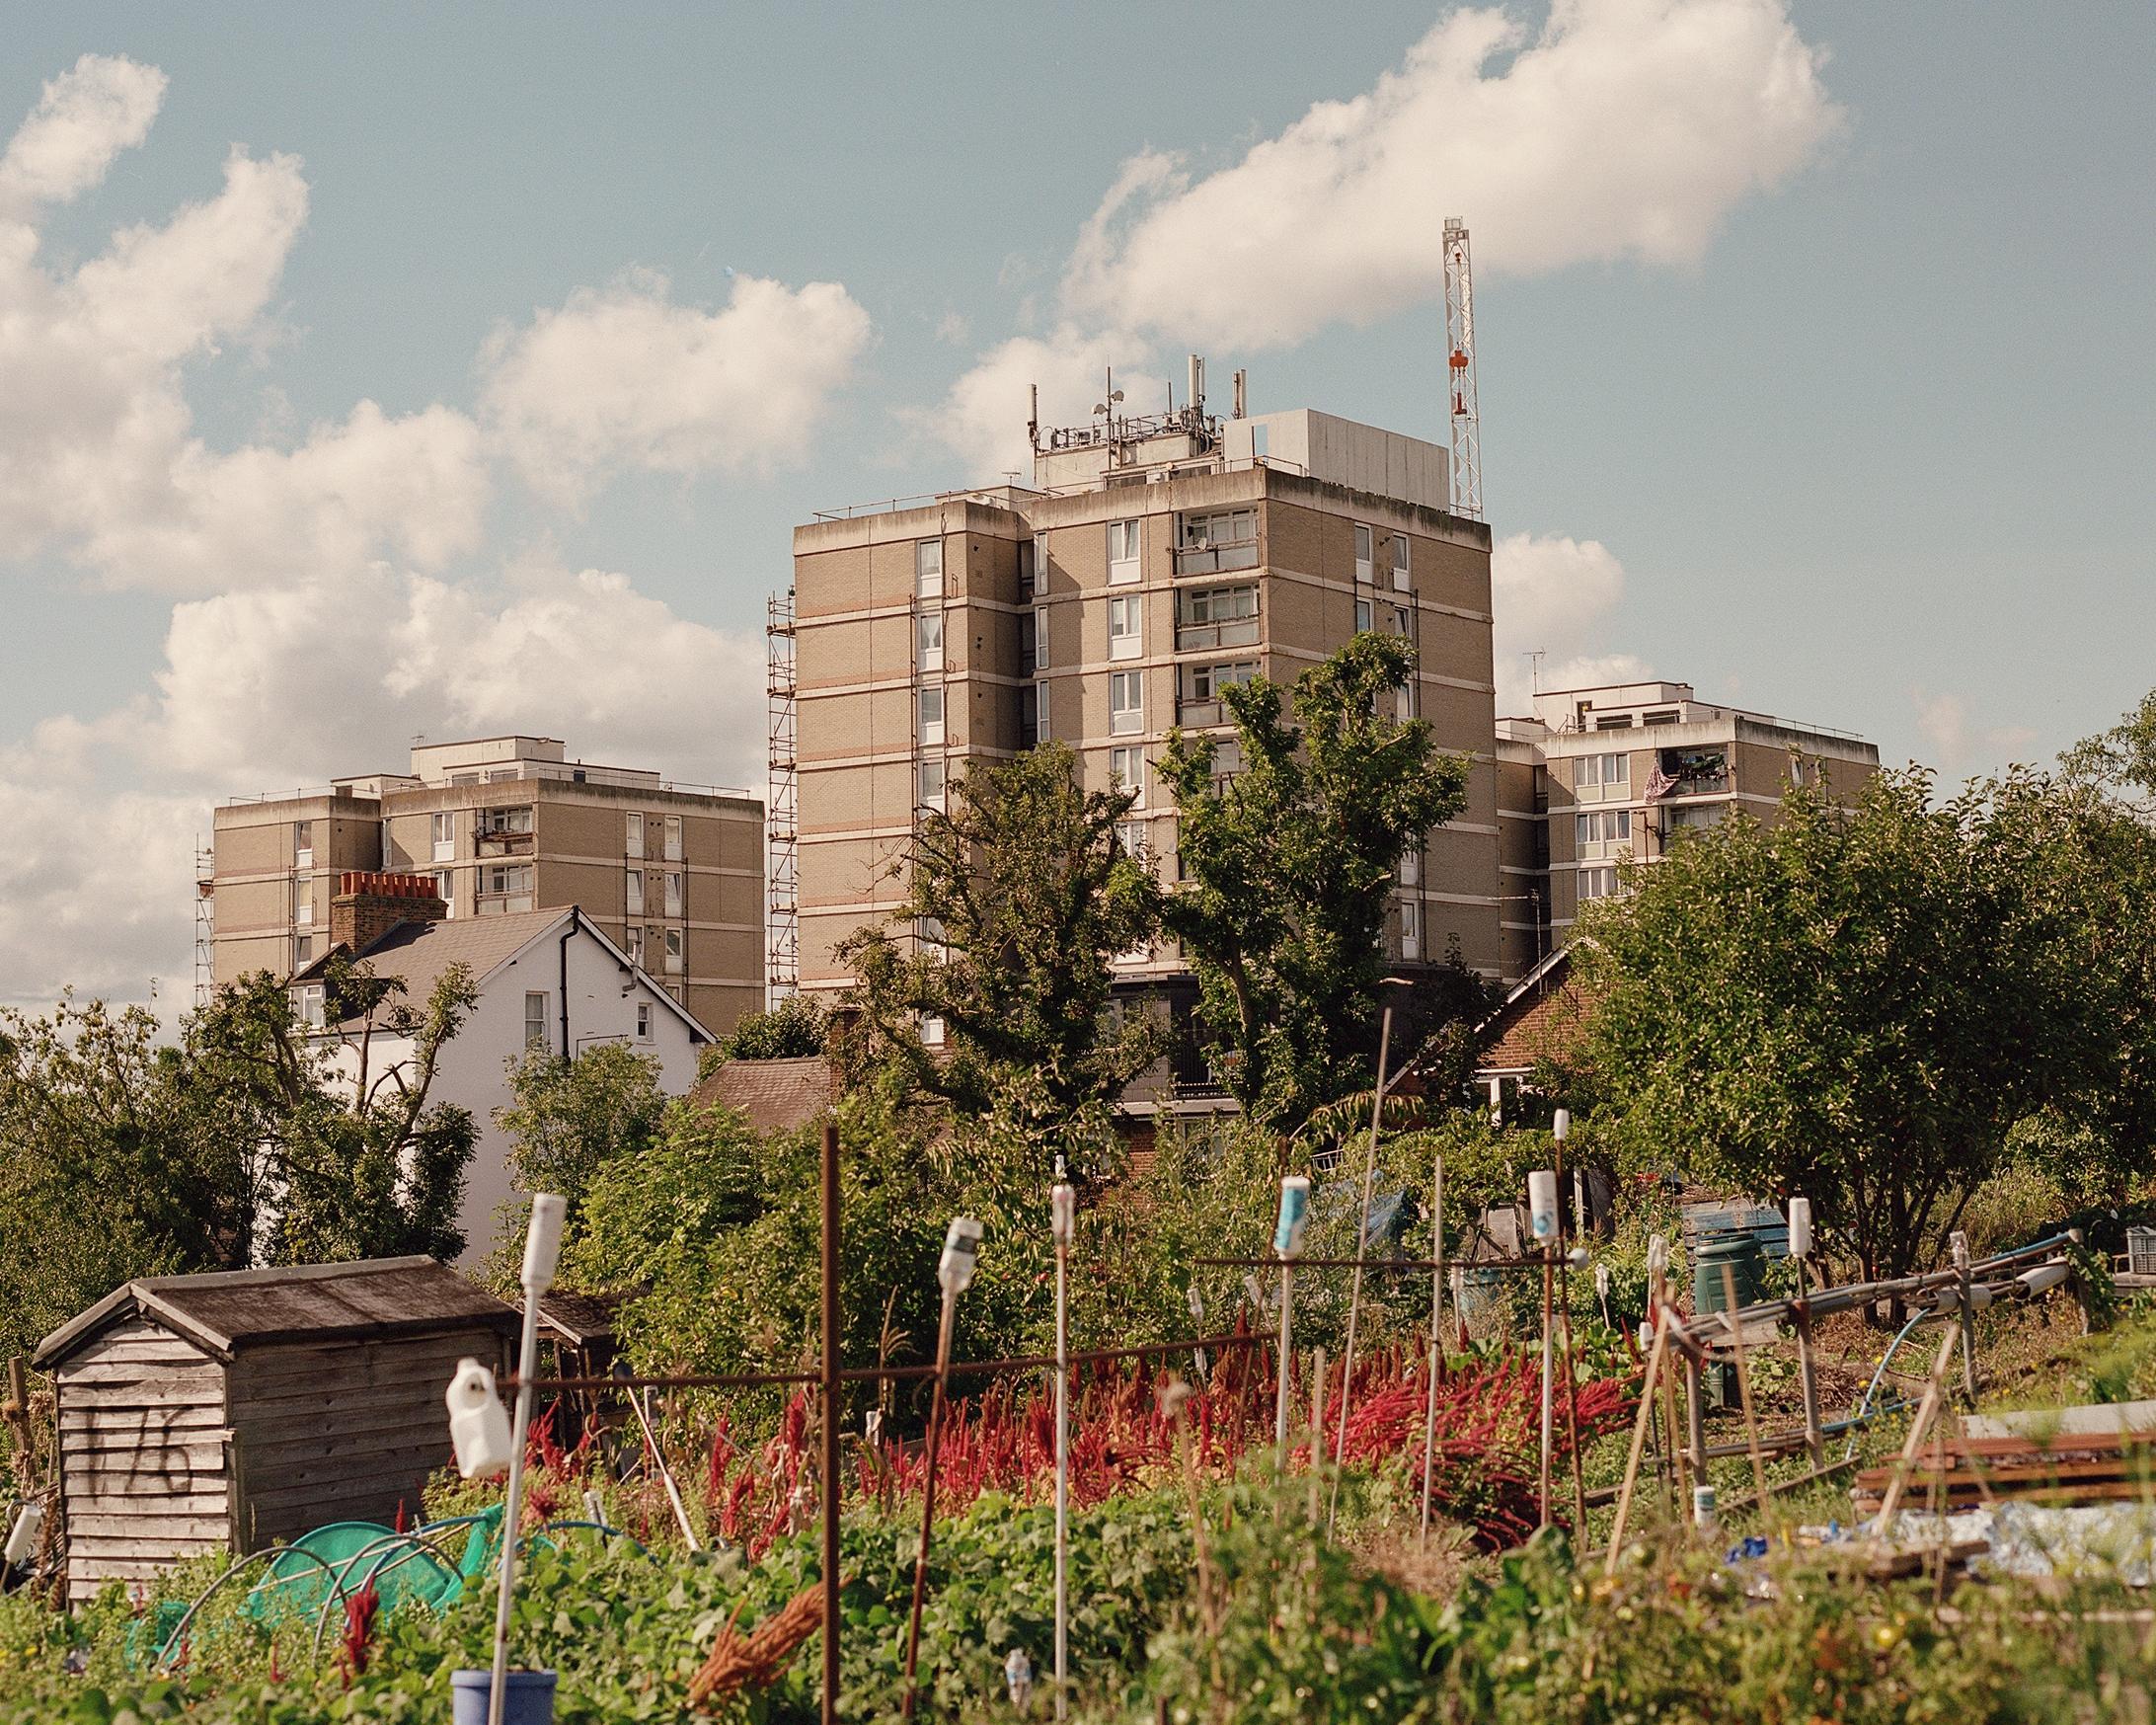 A large allotment site in London next to flats